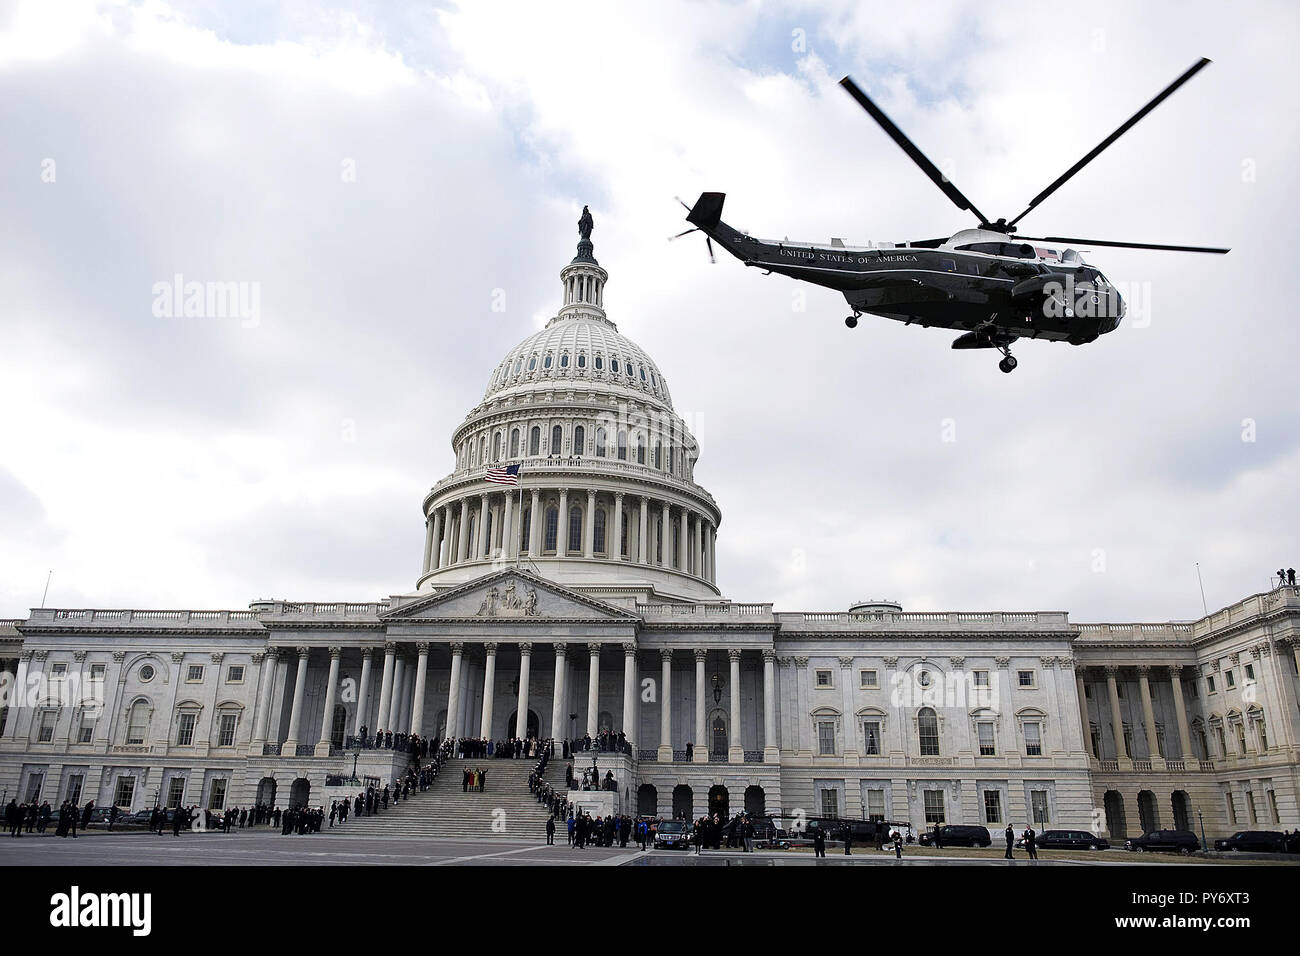 The U.S. Marine Corps helicopter carrying President George W. Bush departs the U.S. Capital Building at the conclusion of inaugural ceremonies for 44th President Barack Obama, Washington, D.C., Jan. 20, 2009.DoD Photo by MC1 Chad J. McNeeley Stock Photo